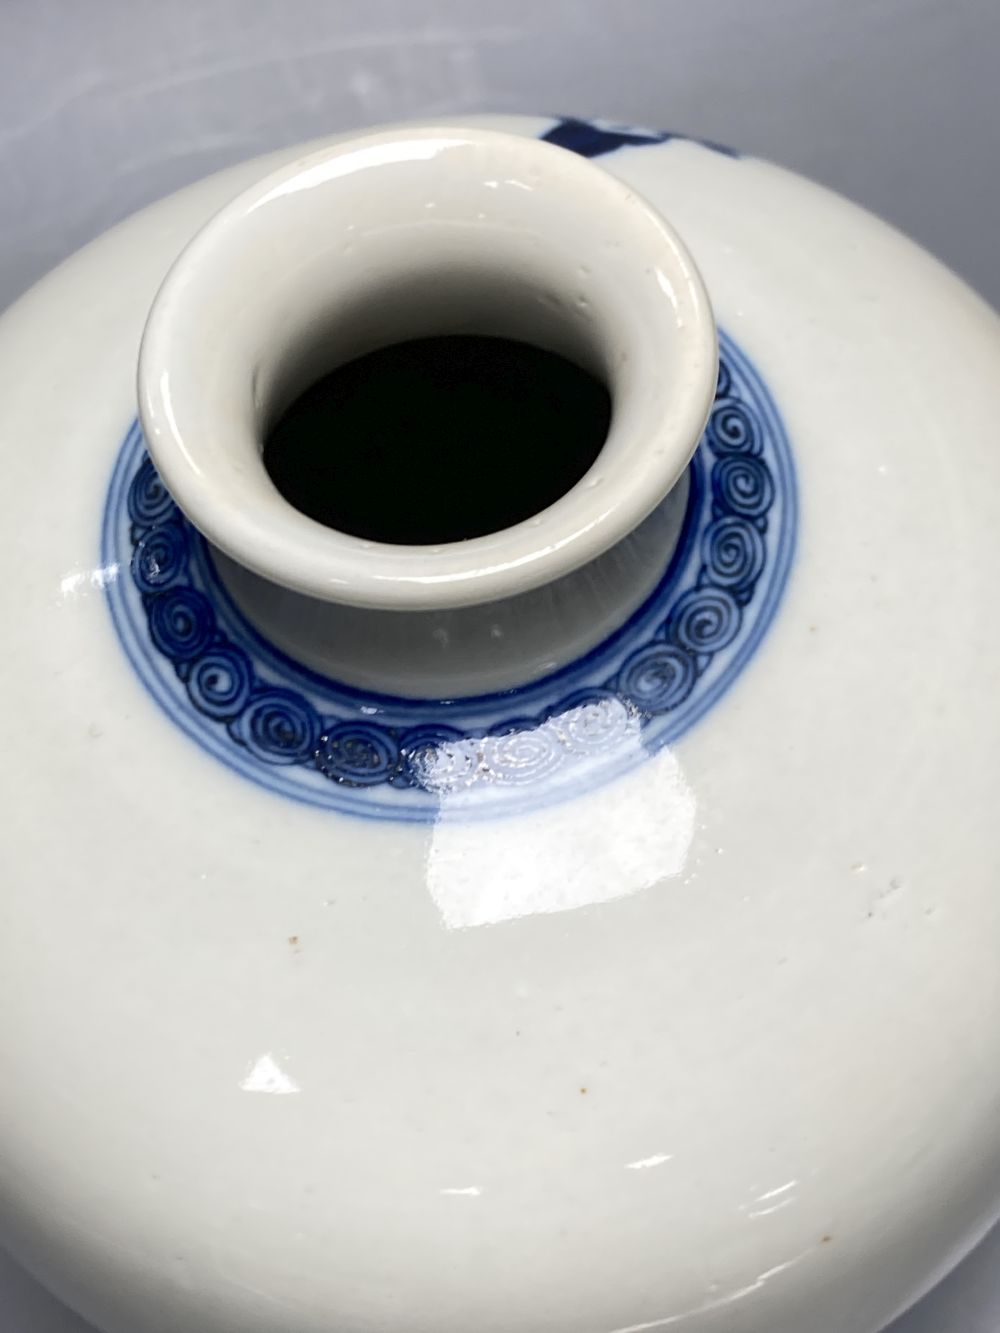 A Chinese blue and white figural vase, height 30cm